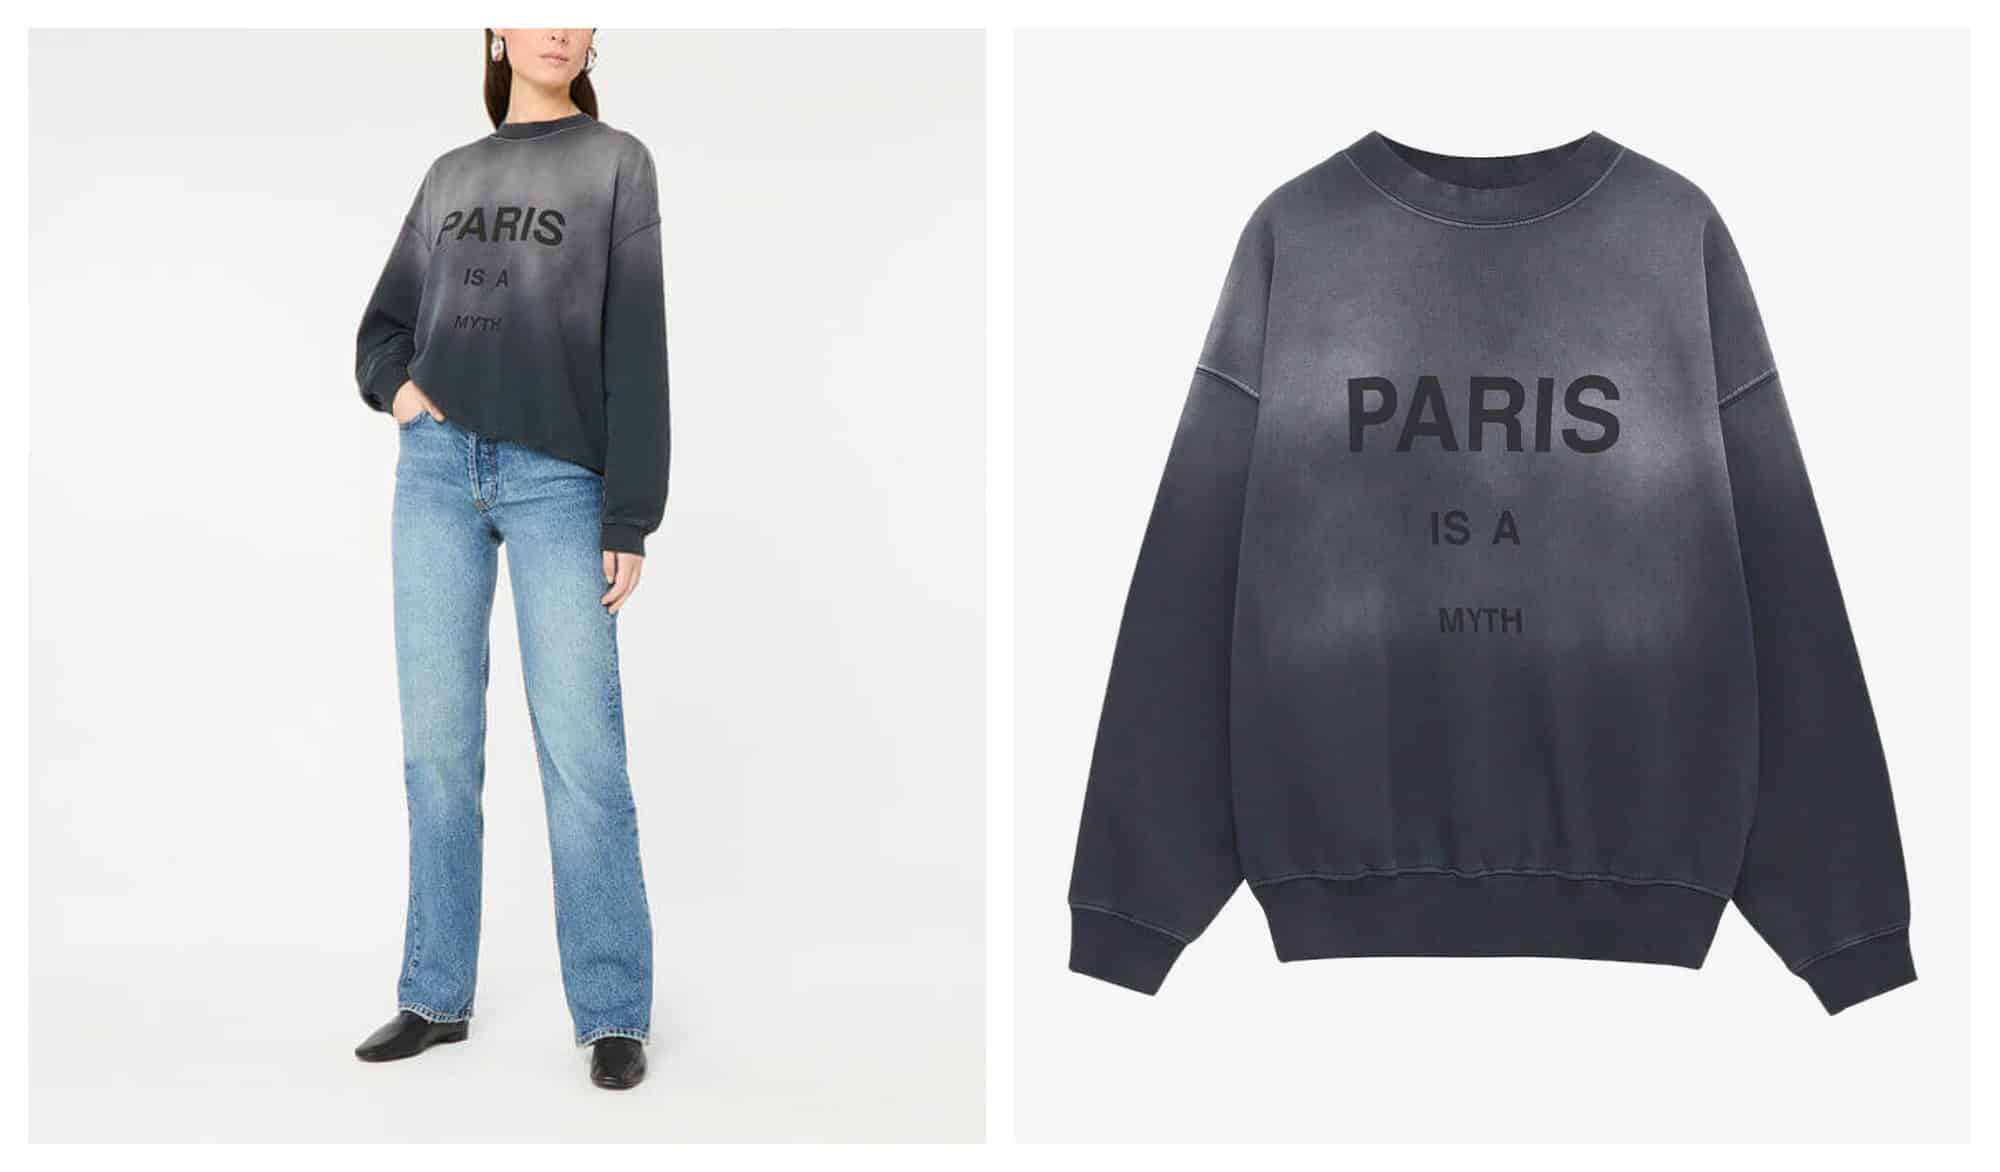 Left: A model in light blue jeans and a pair of black boots shows off the marbled grey "Paris is a myth" sweatshirt with her right hand in her jeans pocket. Right: A standalone image of the sweatshirt itself. It is marbled grey and has "Paris is a myth" in black lettering.